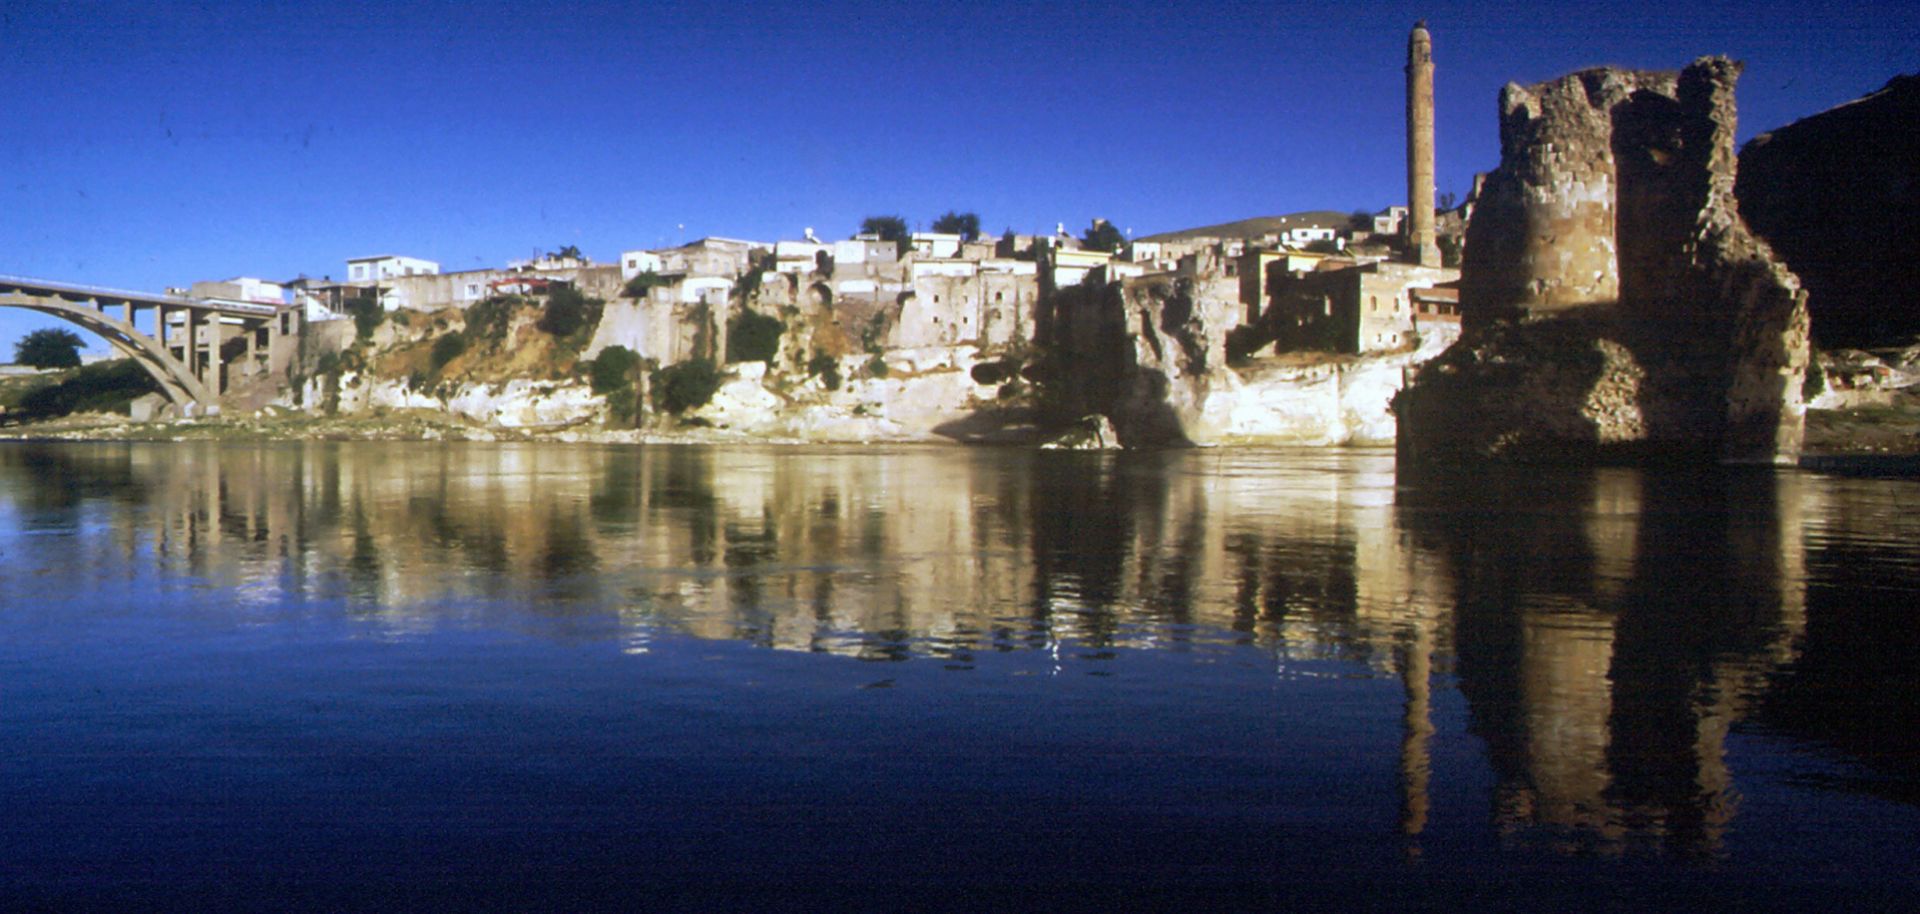 An undated photo shows Hasankeyf, an ancient city on the banks of the Tigris River in southeastern Turkey that will be inundated as part of the Ilisu dam project. 